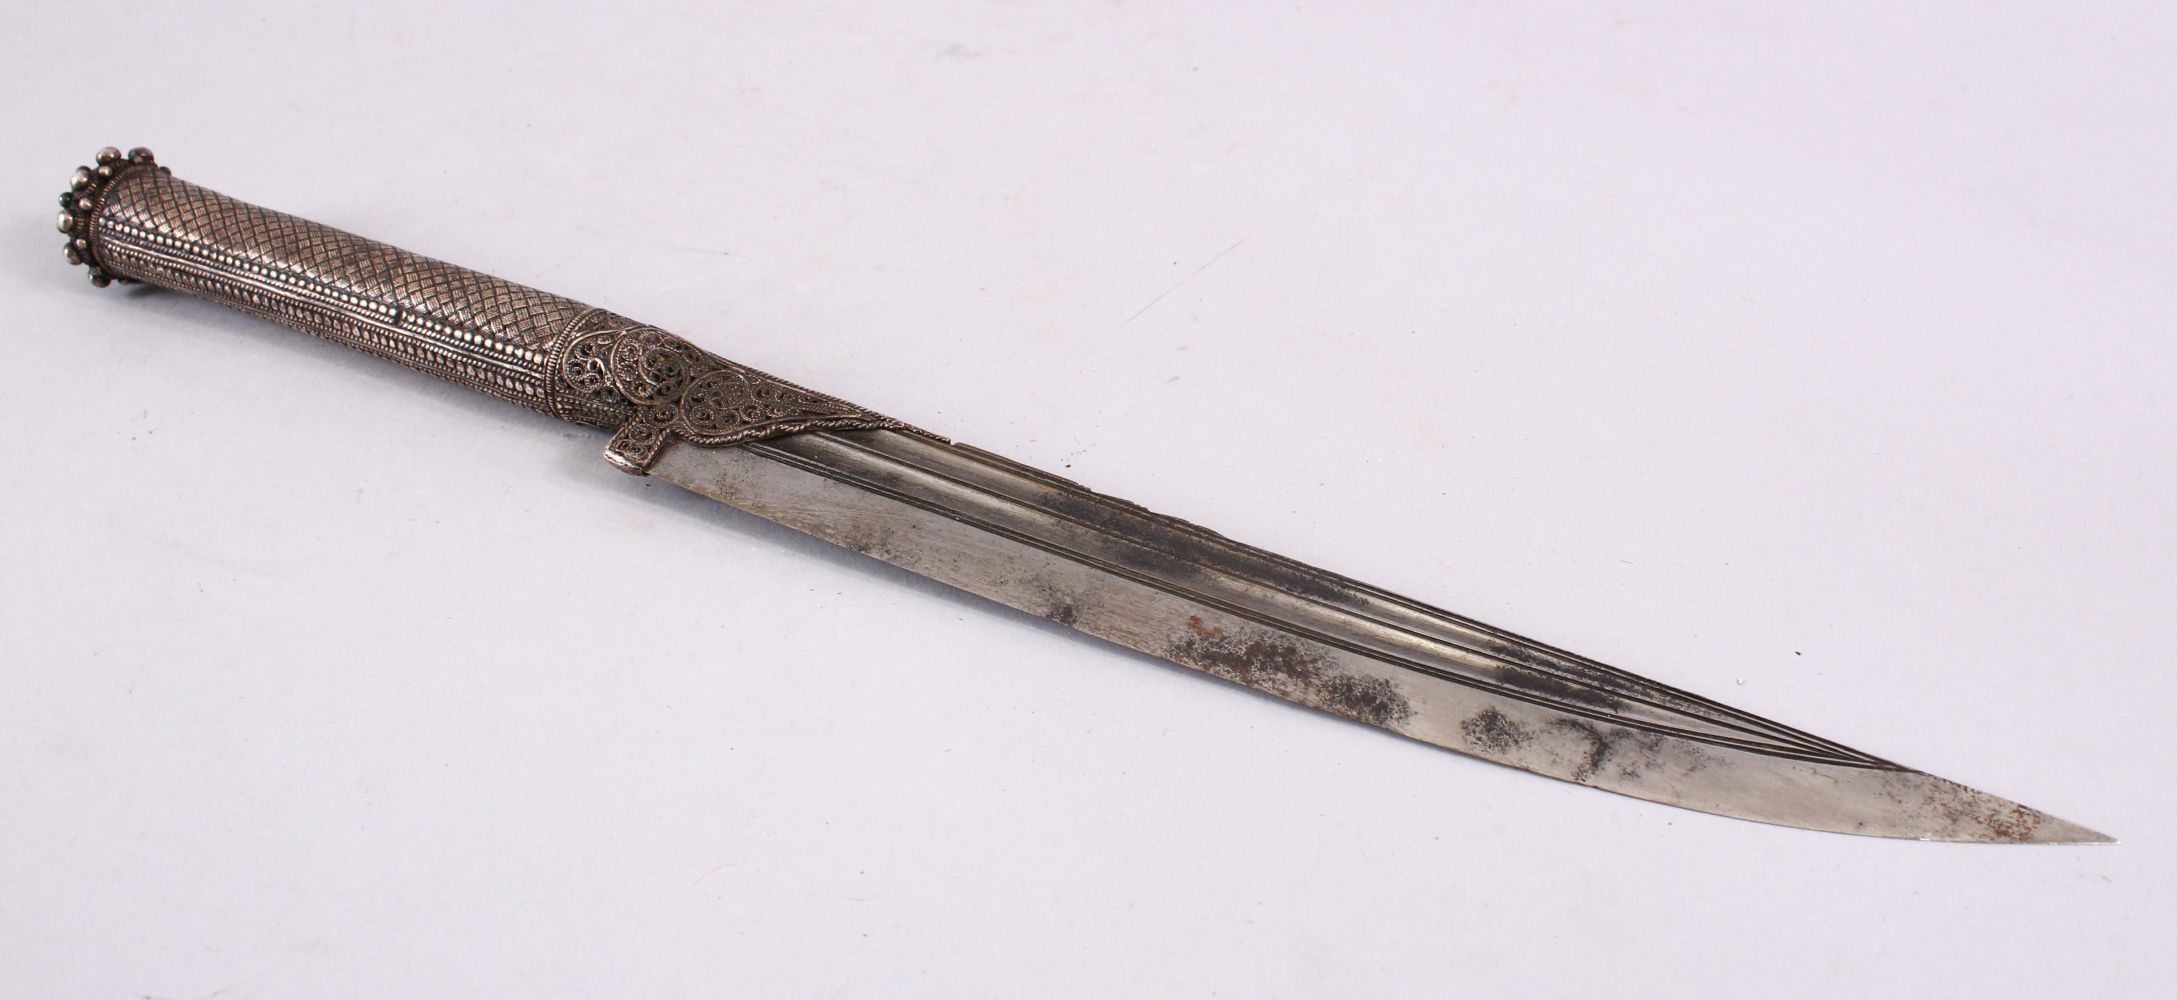 AN 18TH CENTURY OTTOMAN FINE SILVER WORK HANDLED SULTANS HANCER / DAGGER, with silver filigree style